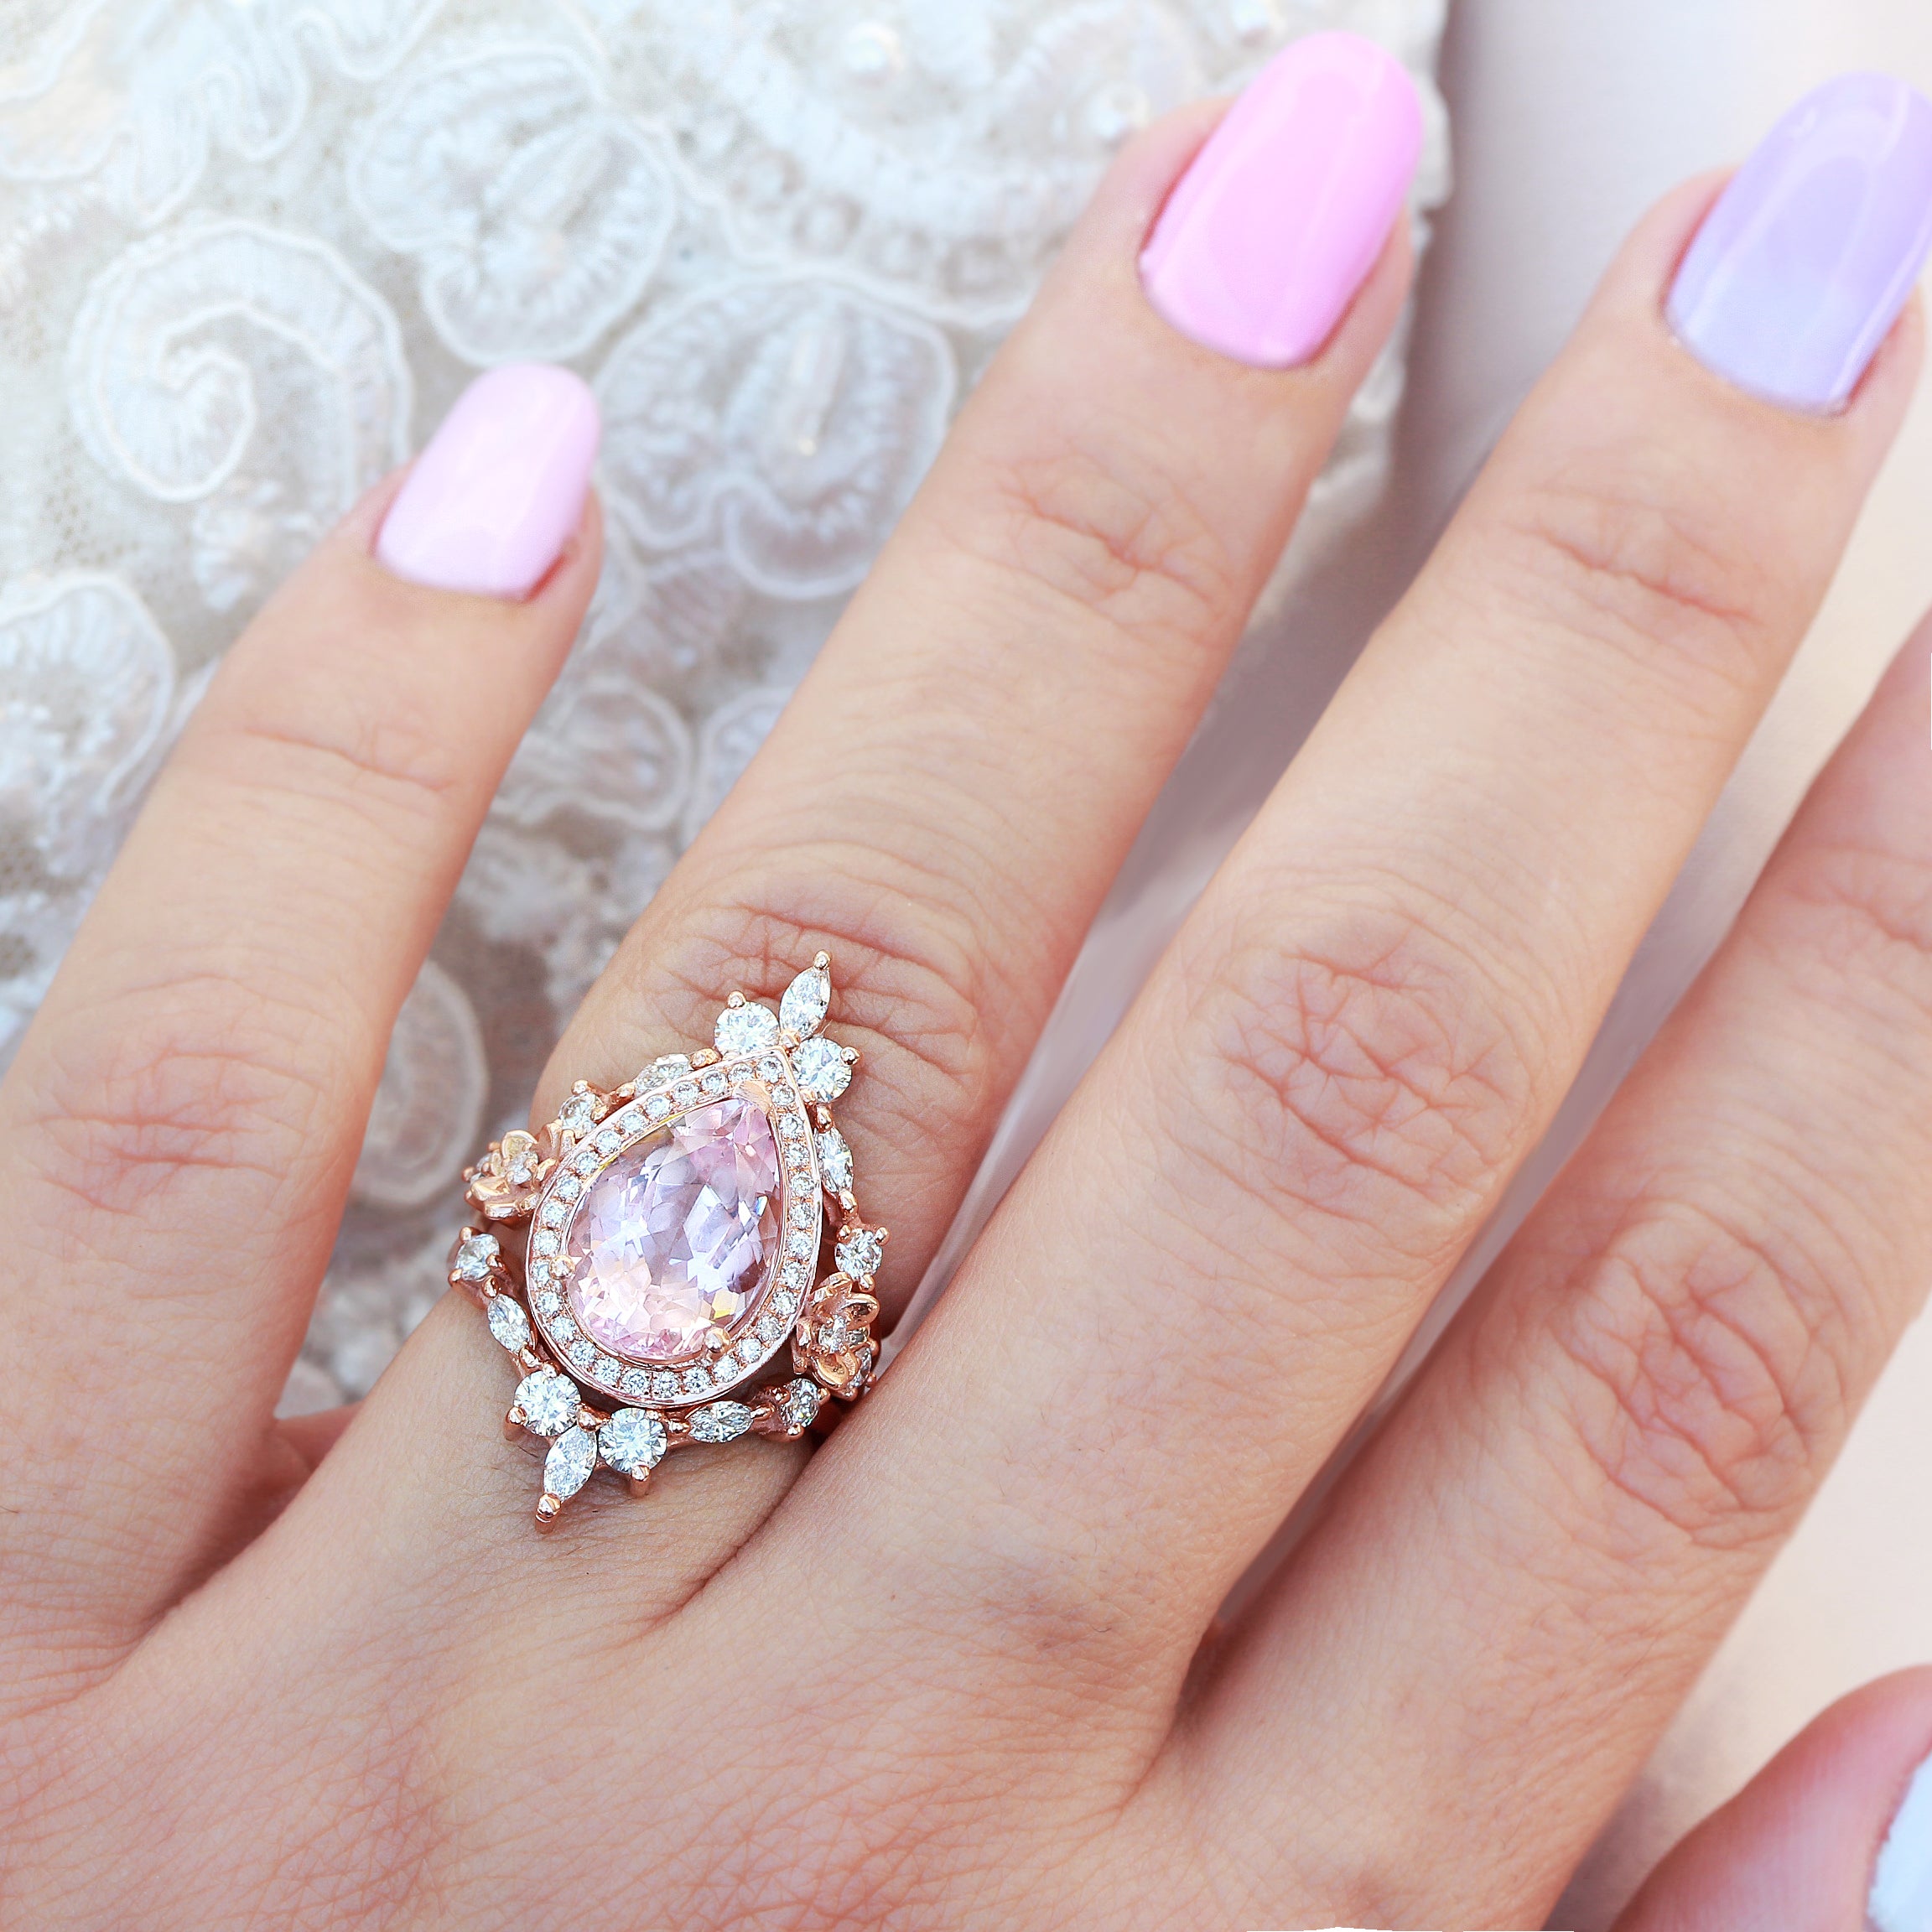 This Pink 59-Carat Diamond Could Be the Most Expensive Ring Ever Sold | SELF